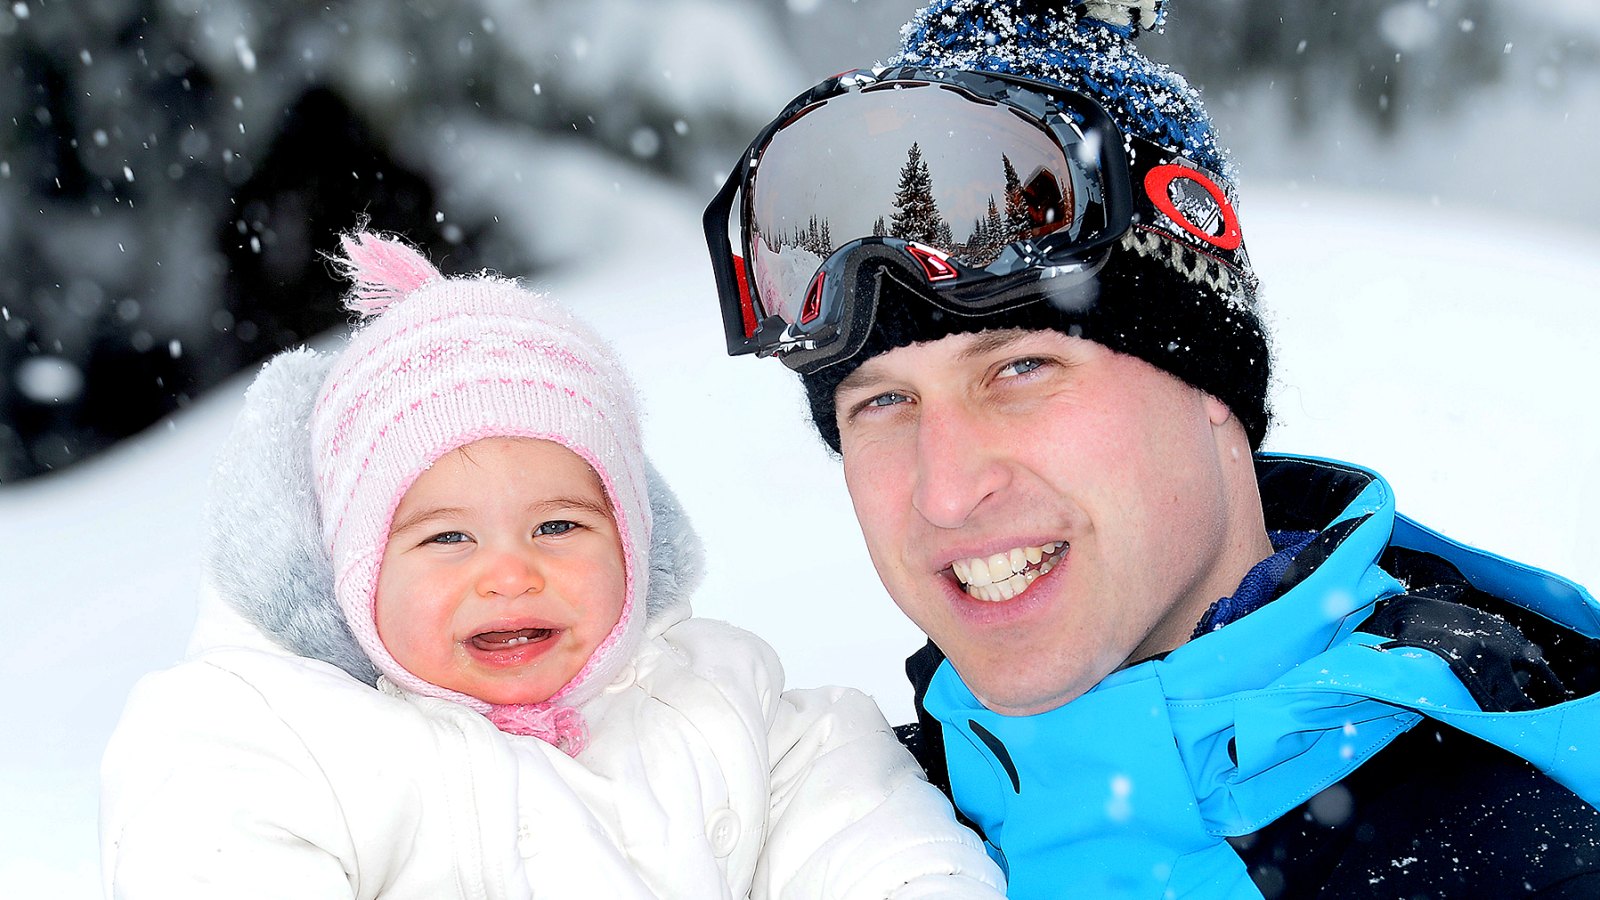 Princess Charlotte and Prince William enjoy a private skiing break on March 3, 2016 in the French Alps.